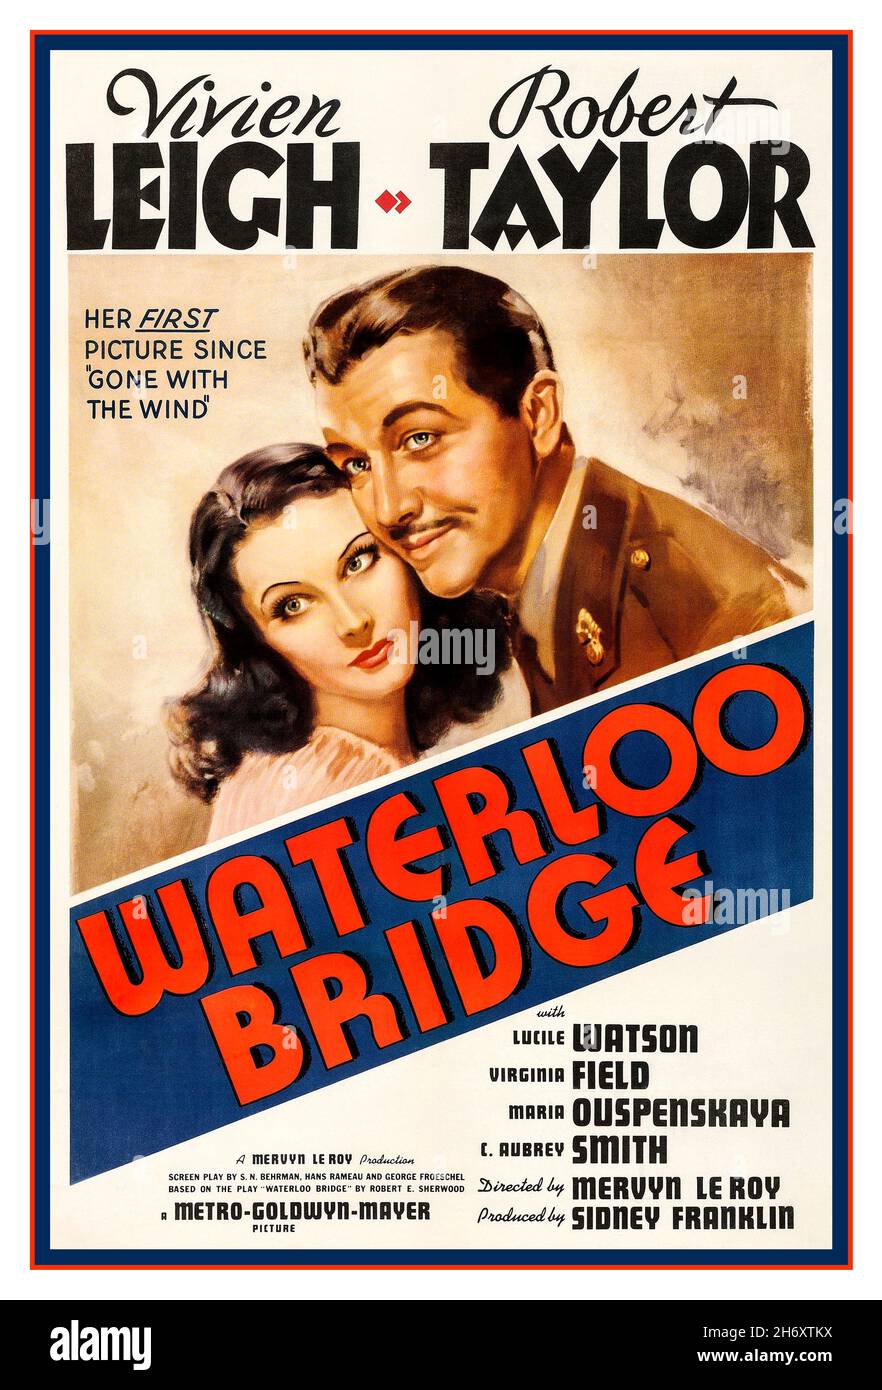 Vintage Movie film poster Waterloo Bridge starring Vivien Leigh and Robert Taylor, is  1940 remake of the 1931 American drama film also called Waterloo Bridge, adapted from the 1930 play Waterloo Bridge. In an extended flashback narration, it recounts the story of a dancer and an army captain who meet by chance on Waterloo Bridge. The film was made by Metro-Goldwyn-Mayer, directed by Mervyn LeRoy and produced by Sidney Franklin and Mervyn LeRoy. The screenplay is by S. N. Behrman, Hans Rameau and George Froeschel, based on the Broadway drama by Robert E. Sherwood. The music is by Herbert Stoth Stock Photo